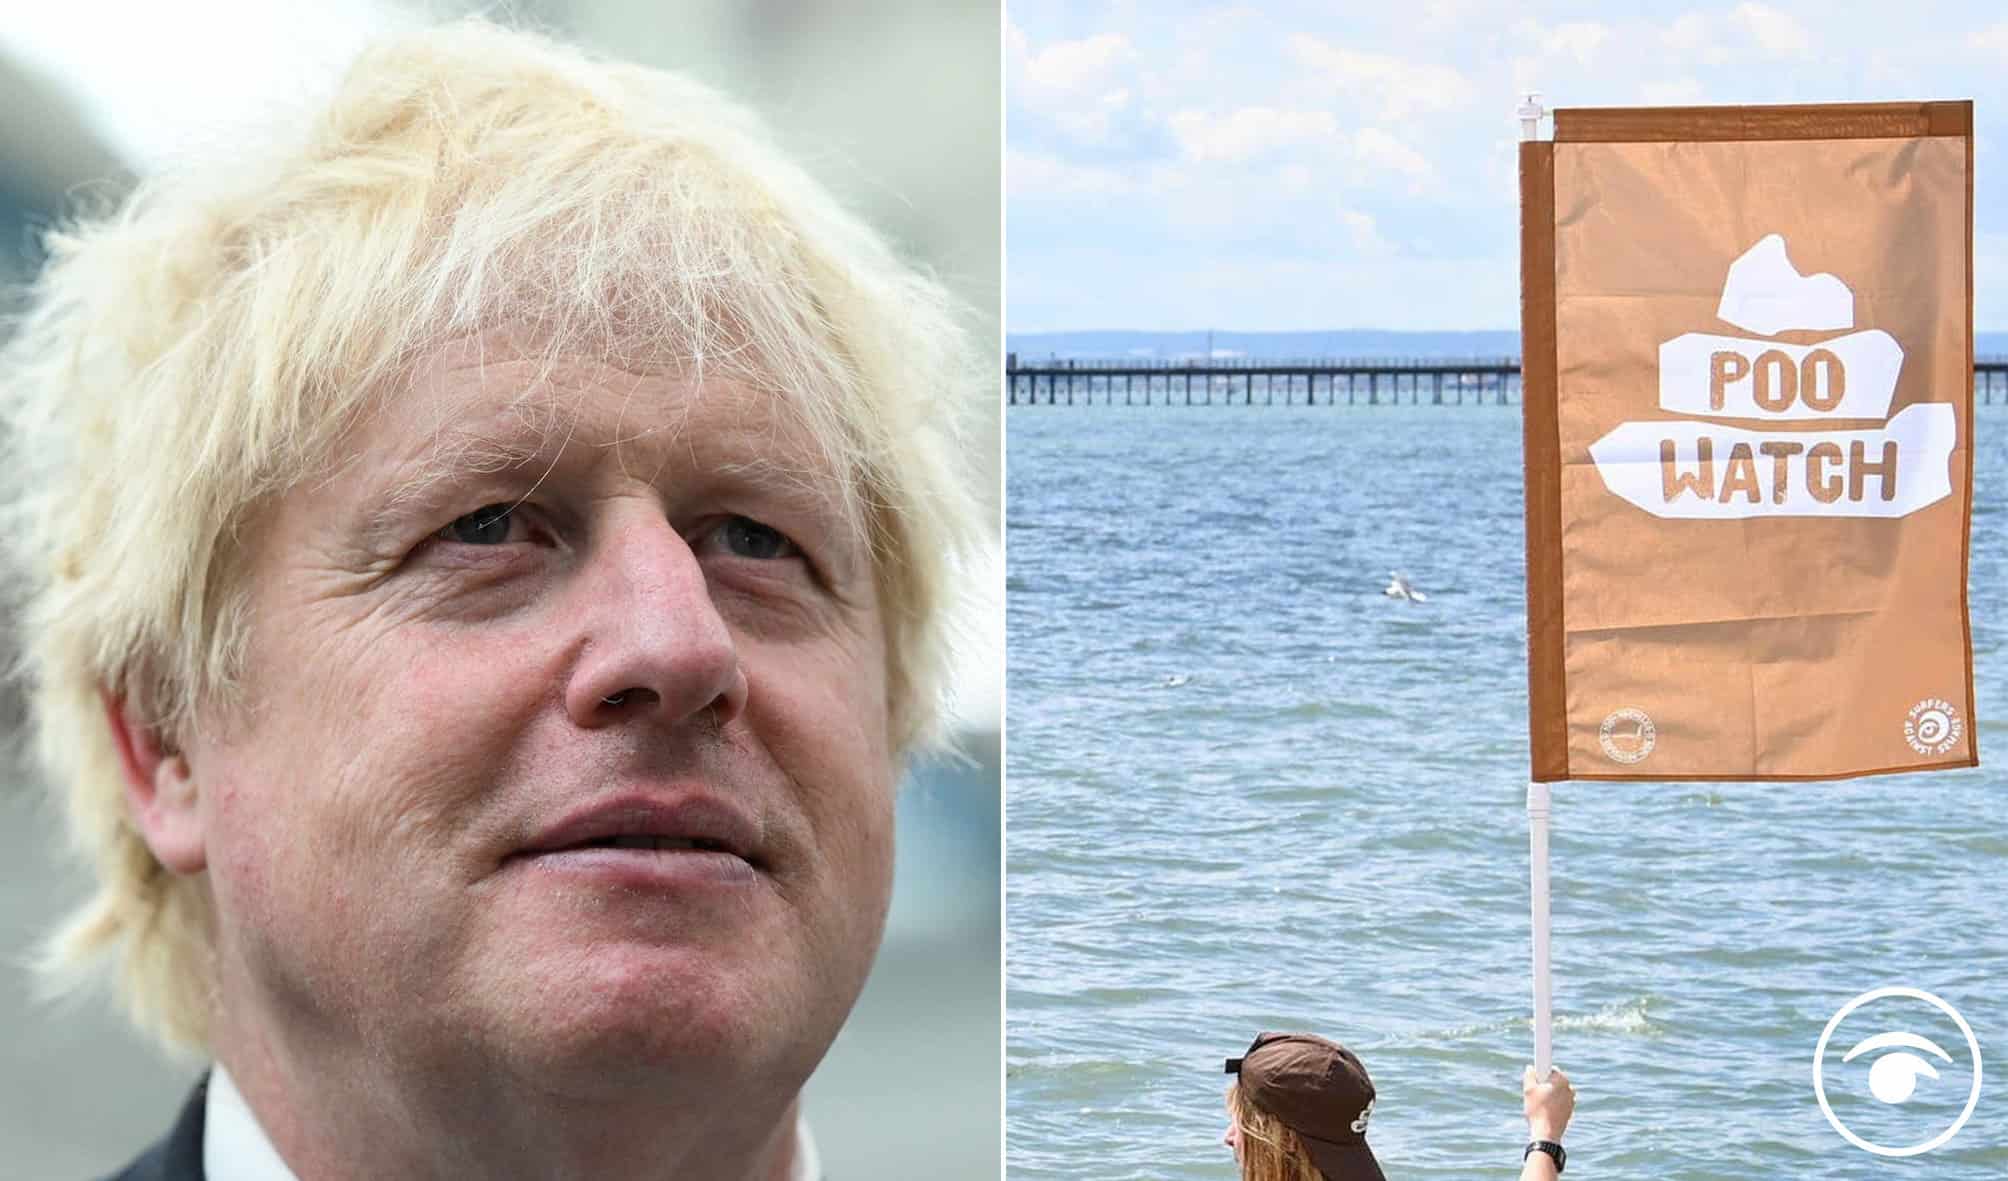 Rachel and Stanley Johnson blame Boris Johnson for sewage shame – This pic sums it up